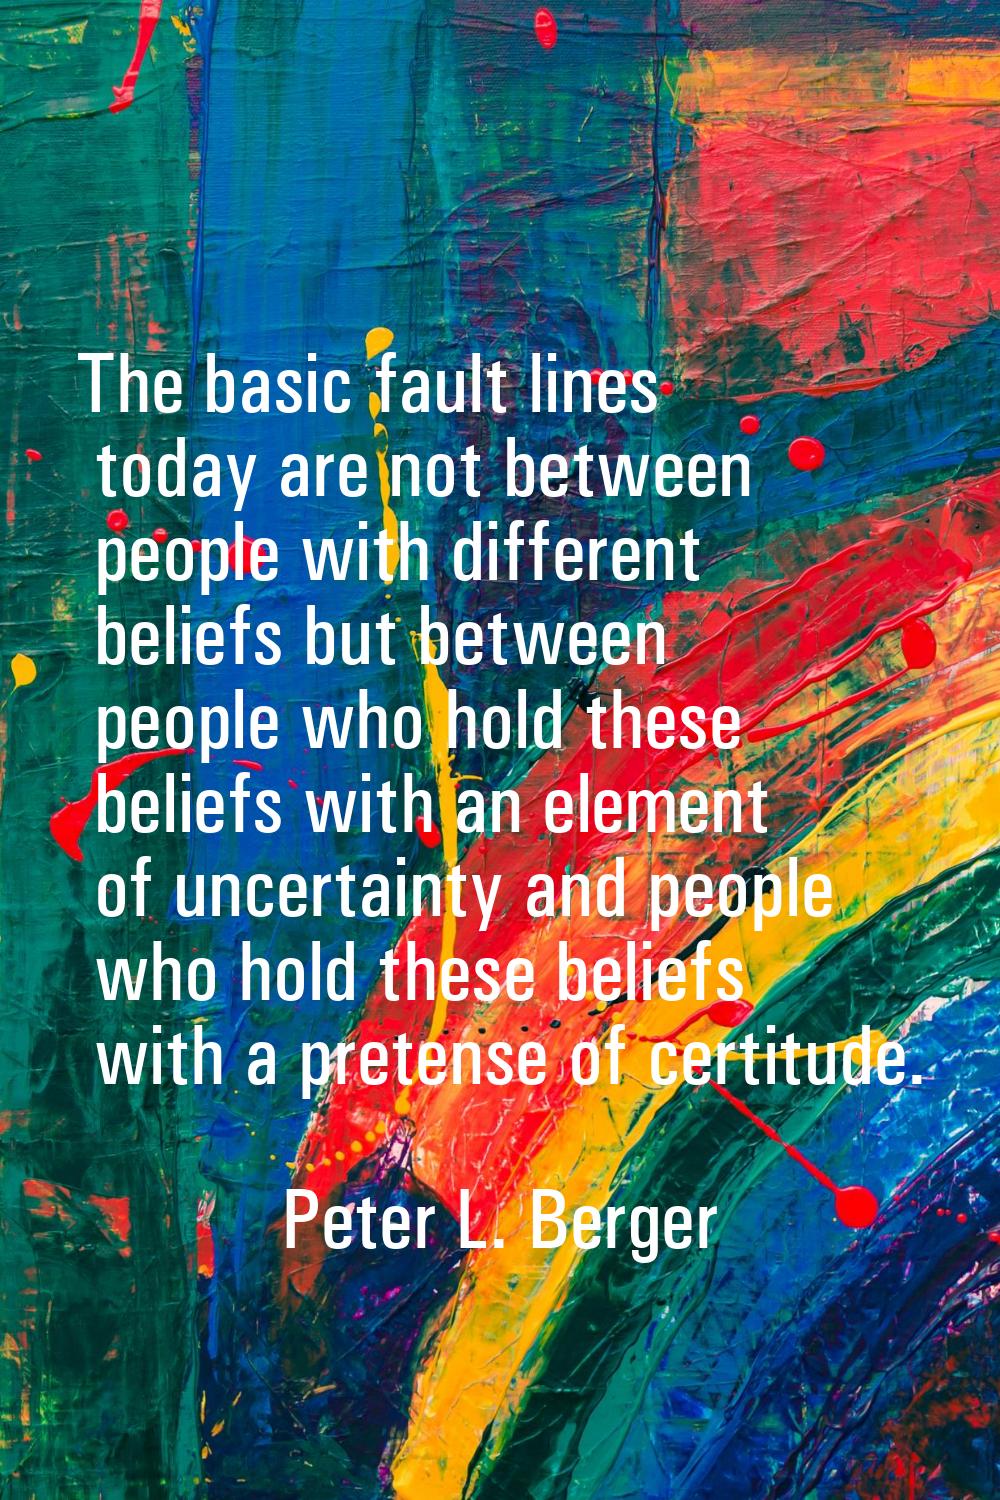 The basic fault lines today are not between people with different beliefs but between people who ho